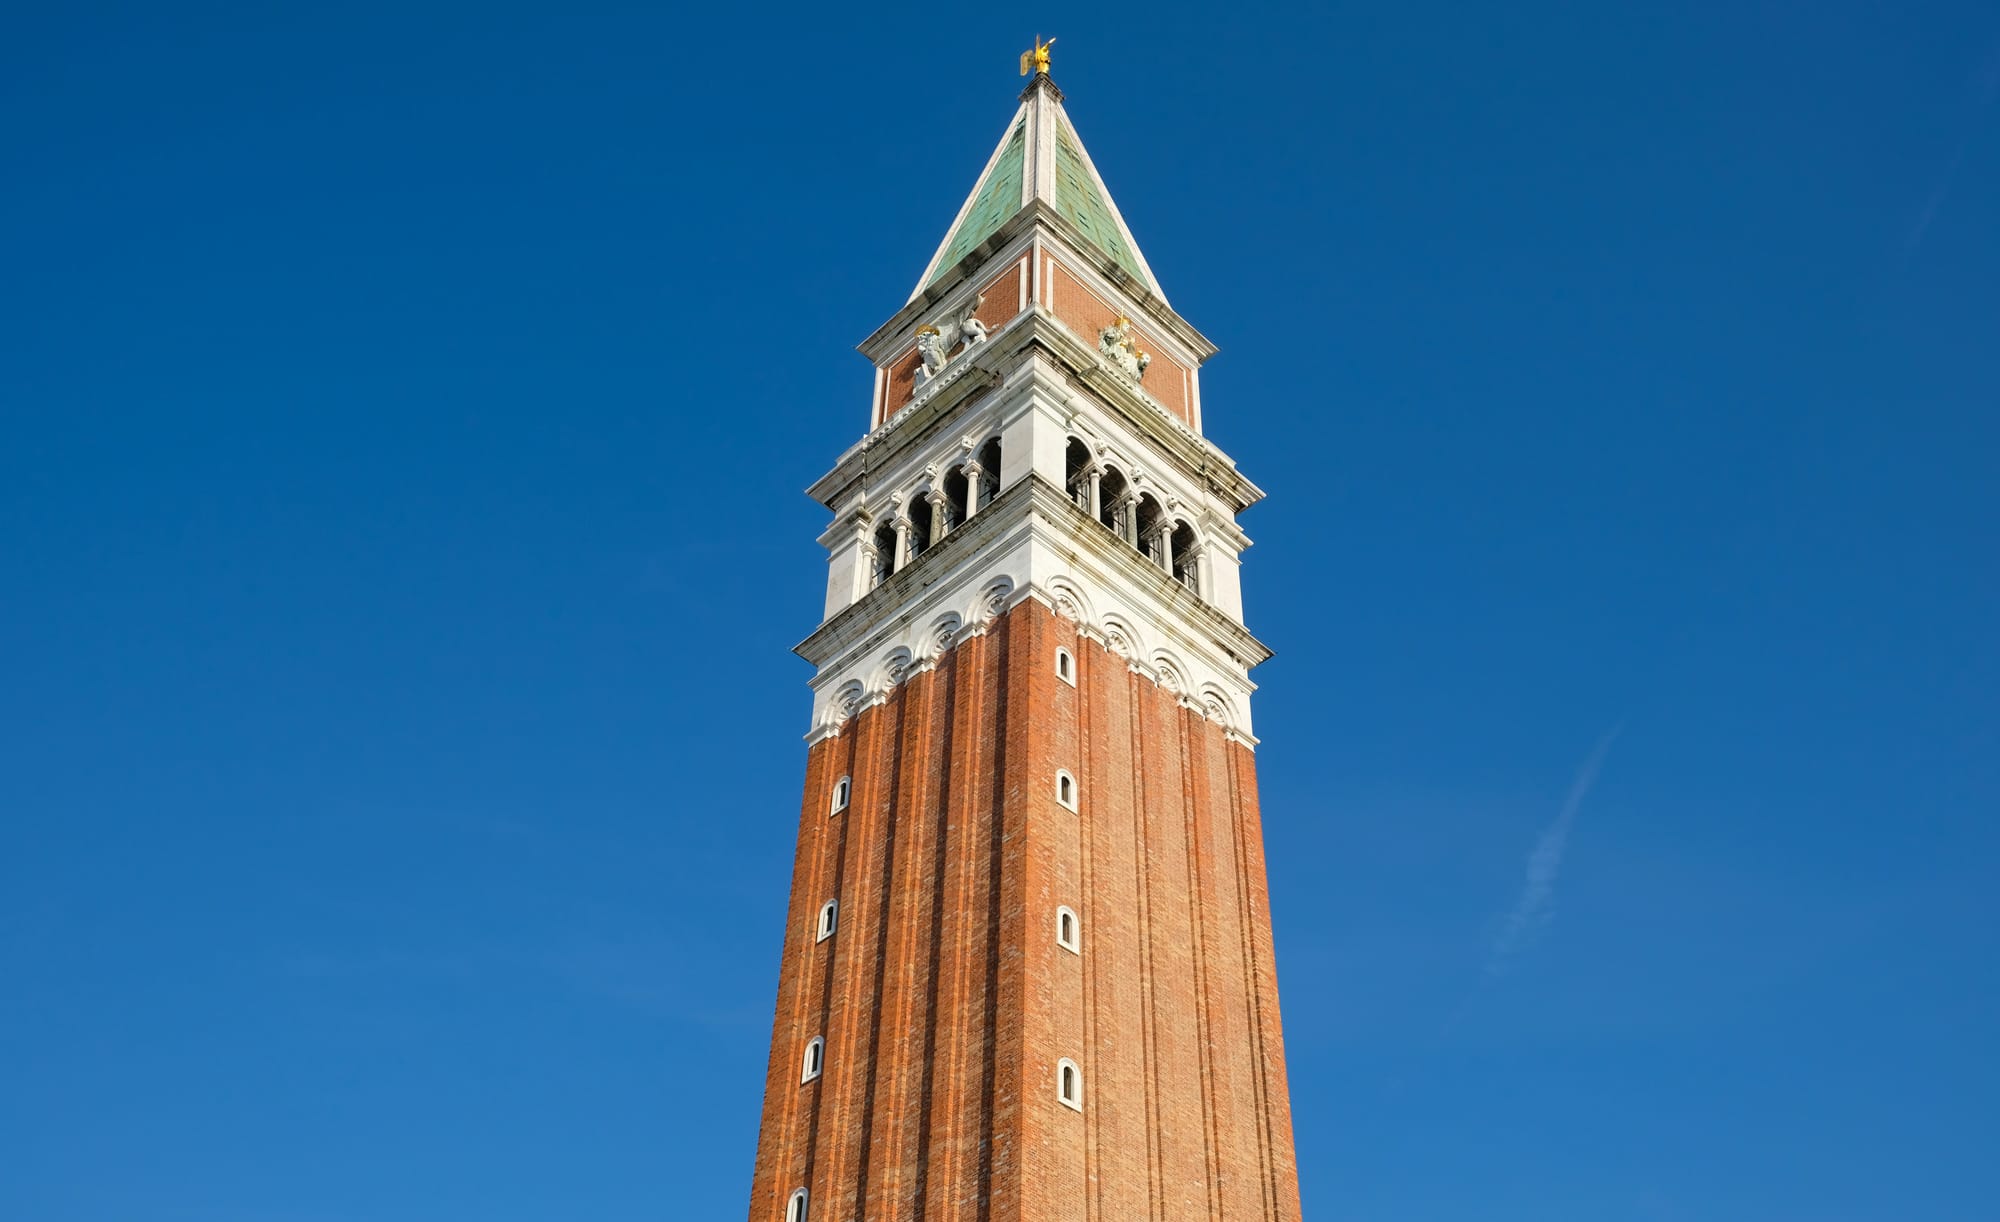 St. Mark's Campanile is an accessible tower in Venice